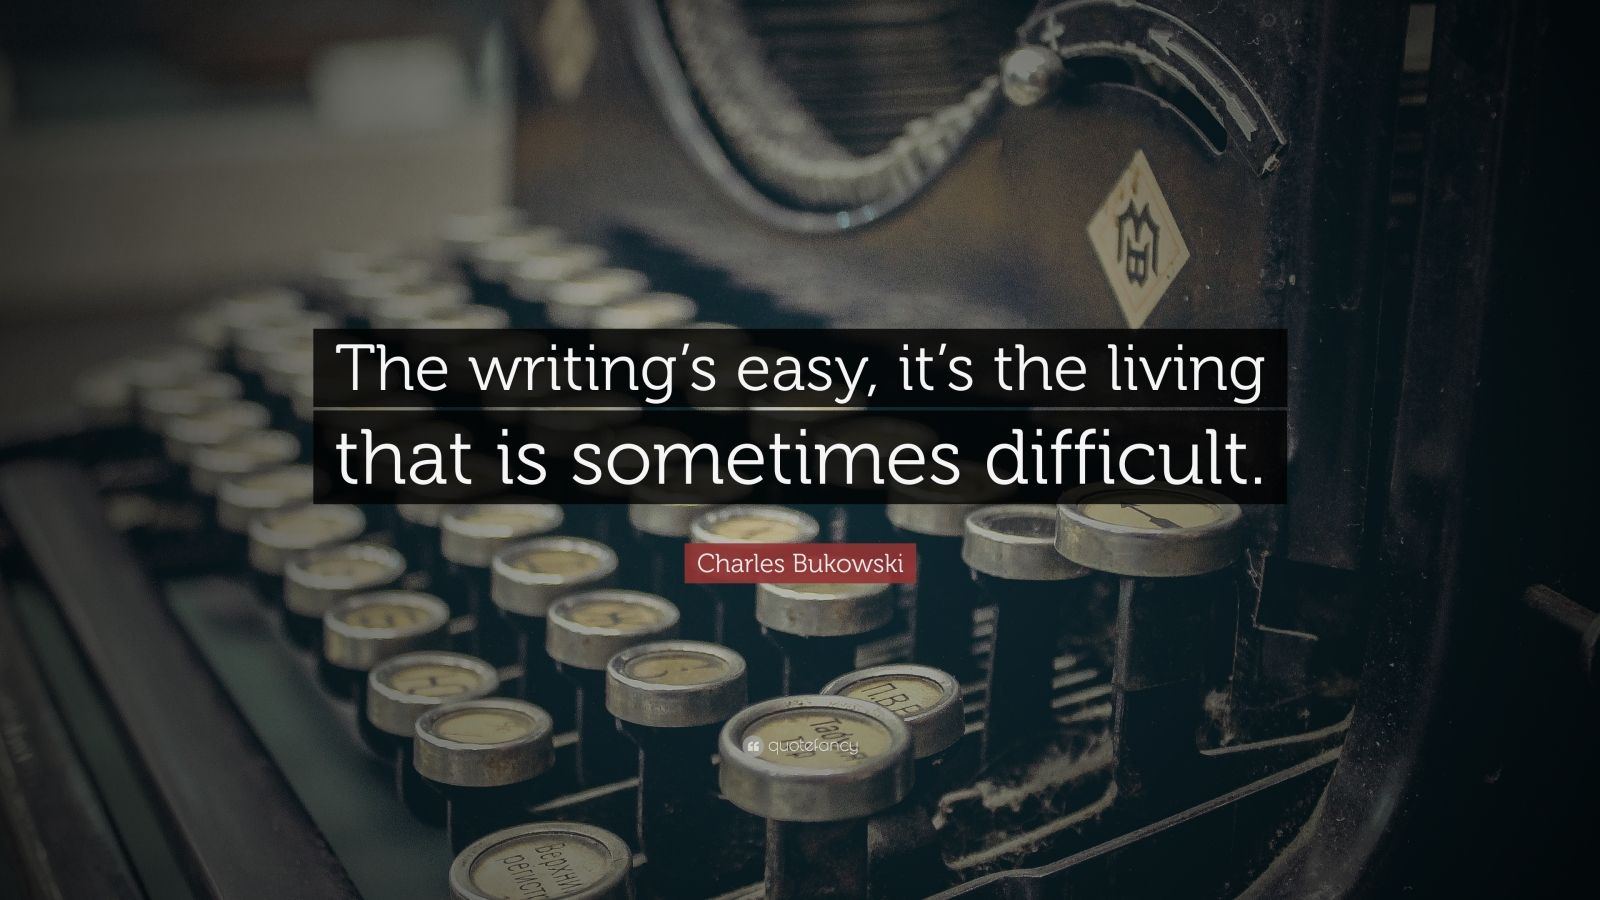 Charles Bukowski Quote: “The writing's easy, it's the living that is  sometimes difficult.”